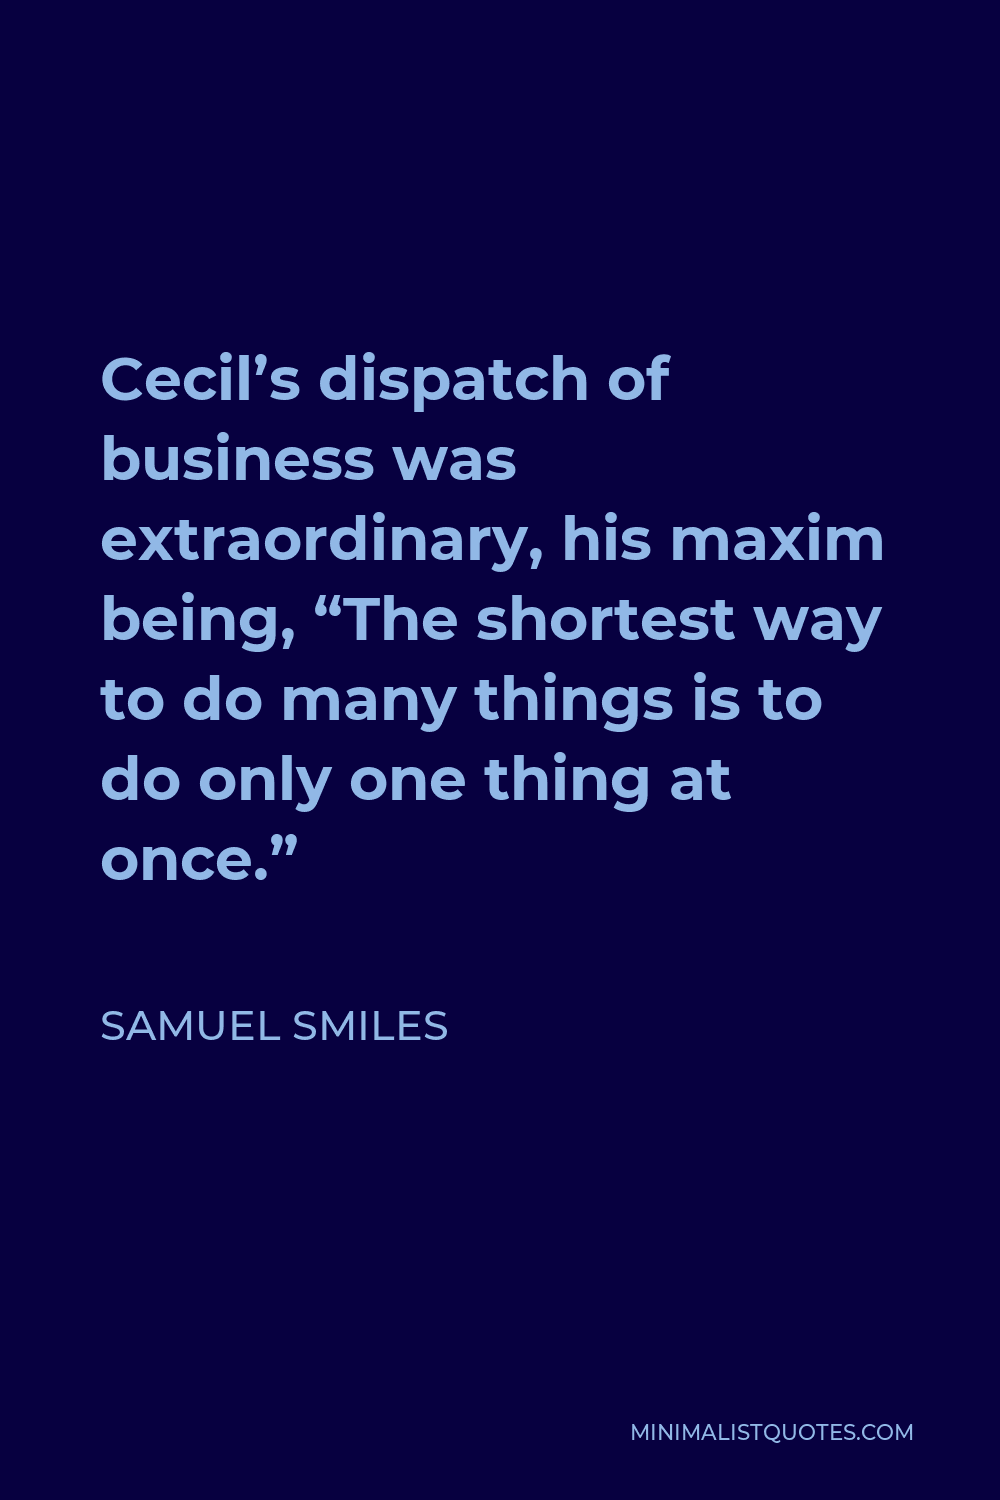 Samuel Smiles Quote - Cecil’s dispatch of business was extraordinary, his maxim being, “The shortest way to do many things is to do only one thing at once.”